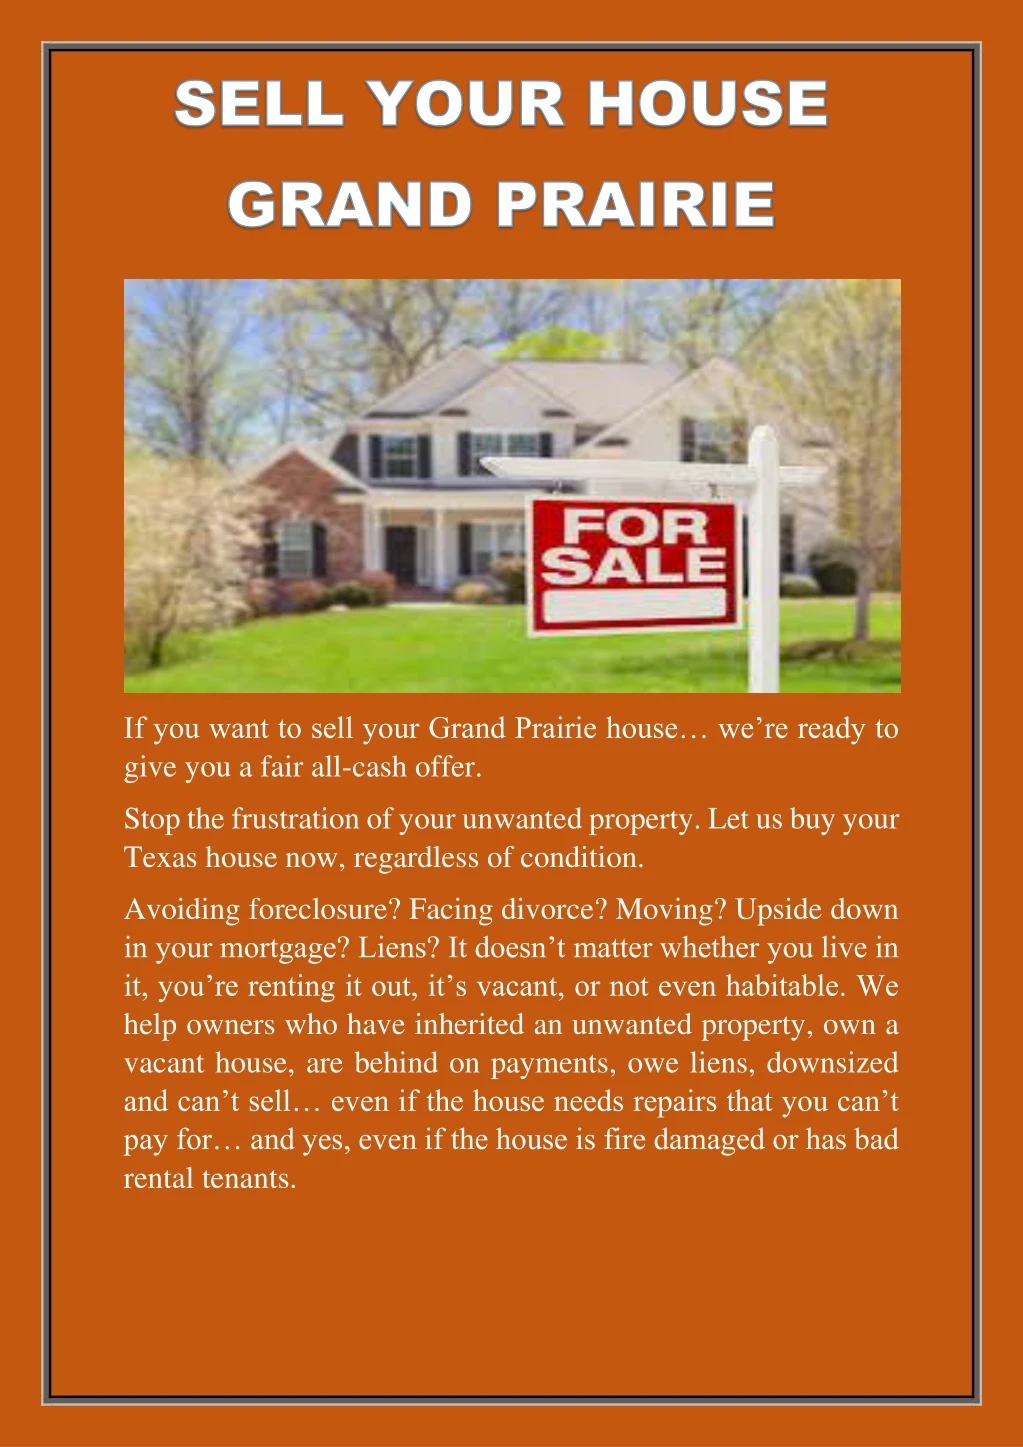 if you want to sell your grand prairie house